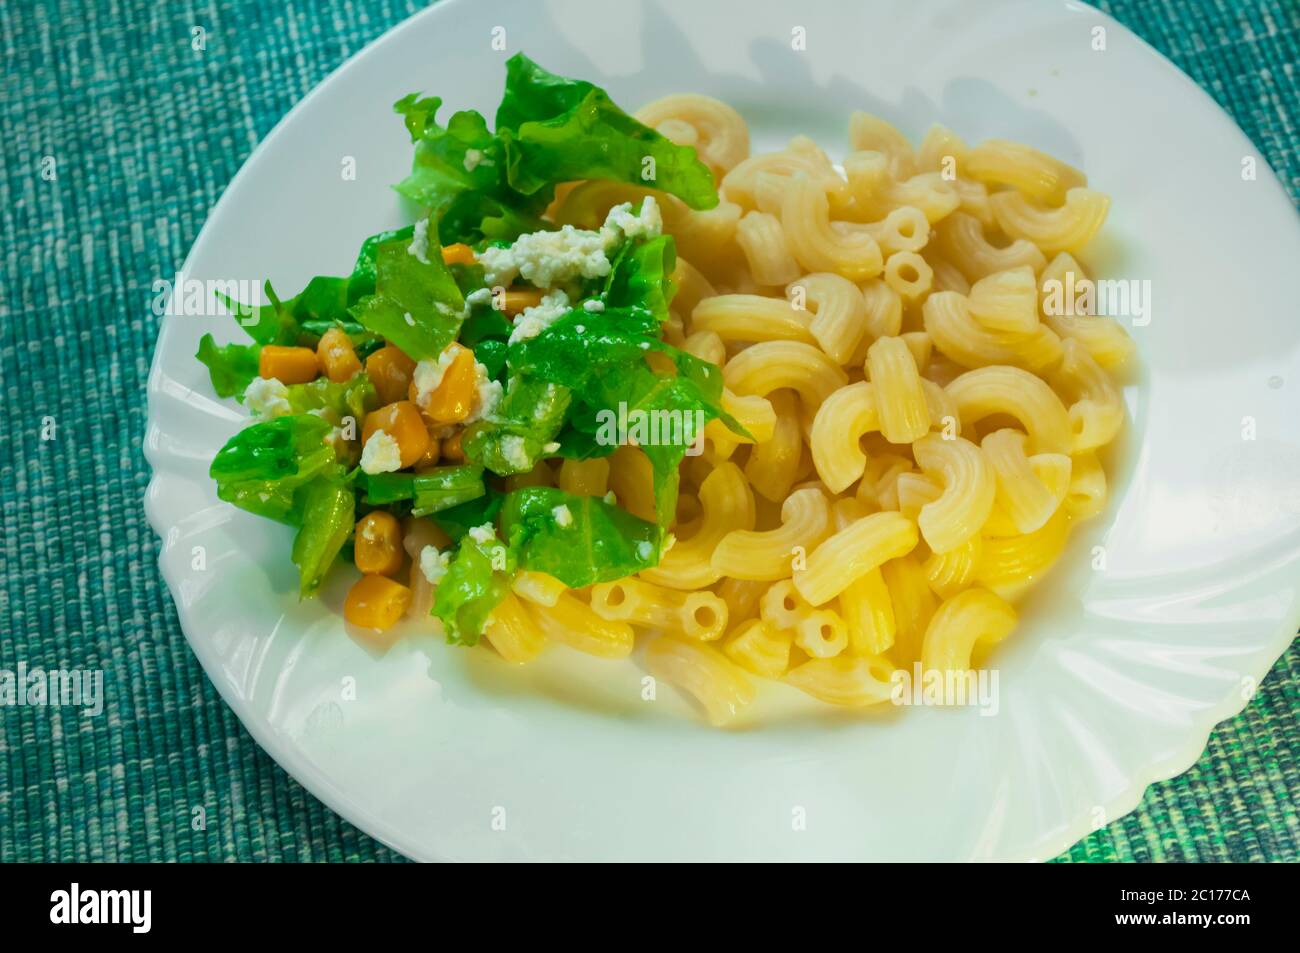 Pasta with garnish: salad, ketchup, corn, scrambled eggs with cracklings on a blue napkin. Portion of pasta on a white plate Stock Photo